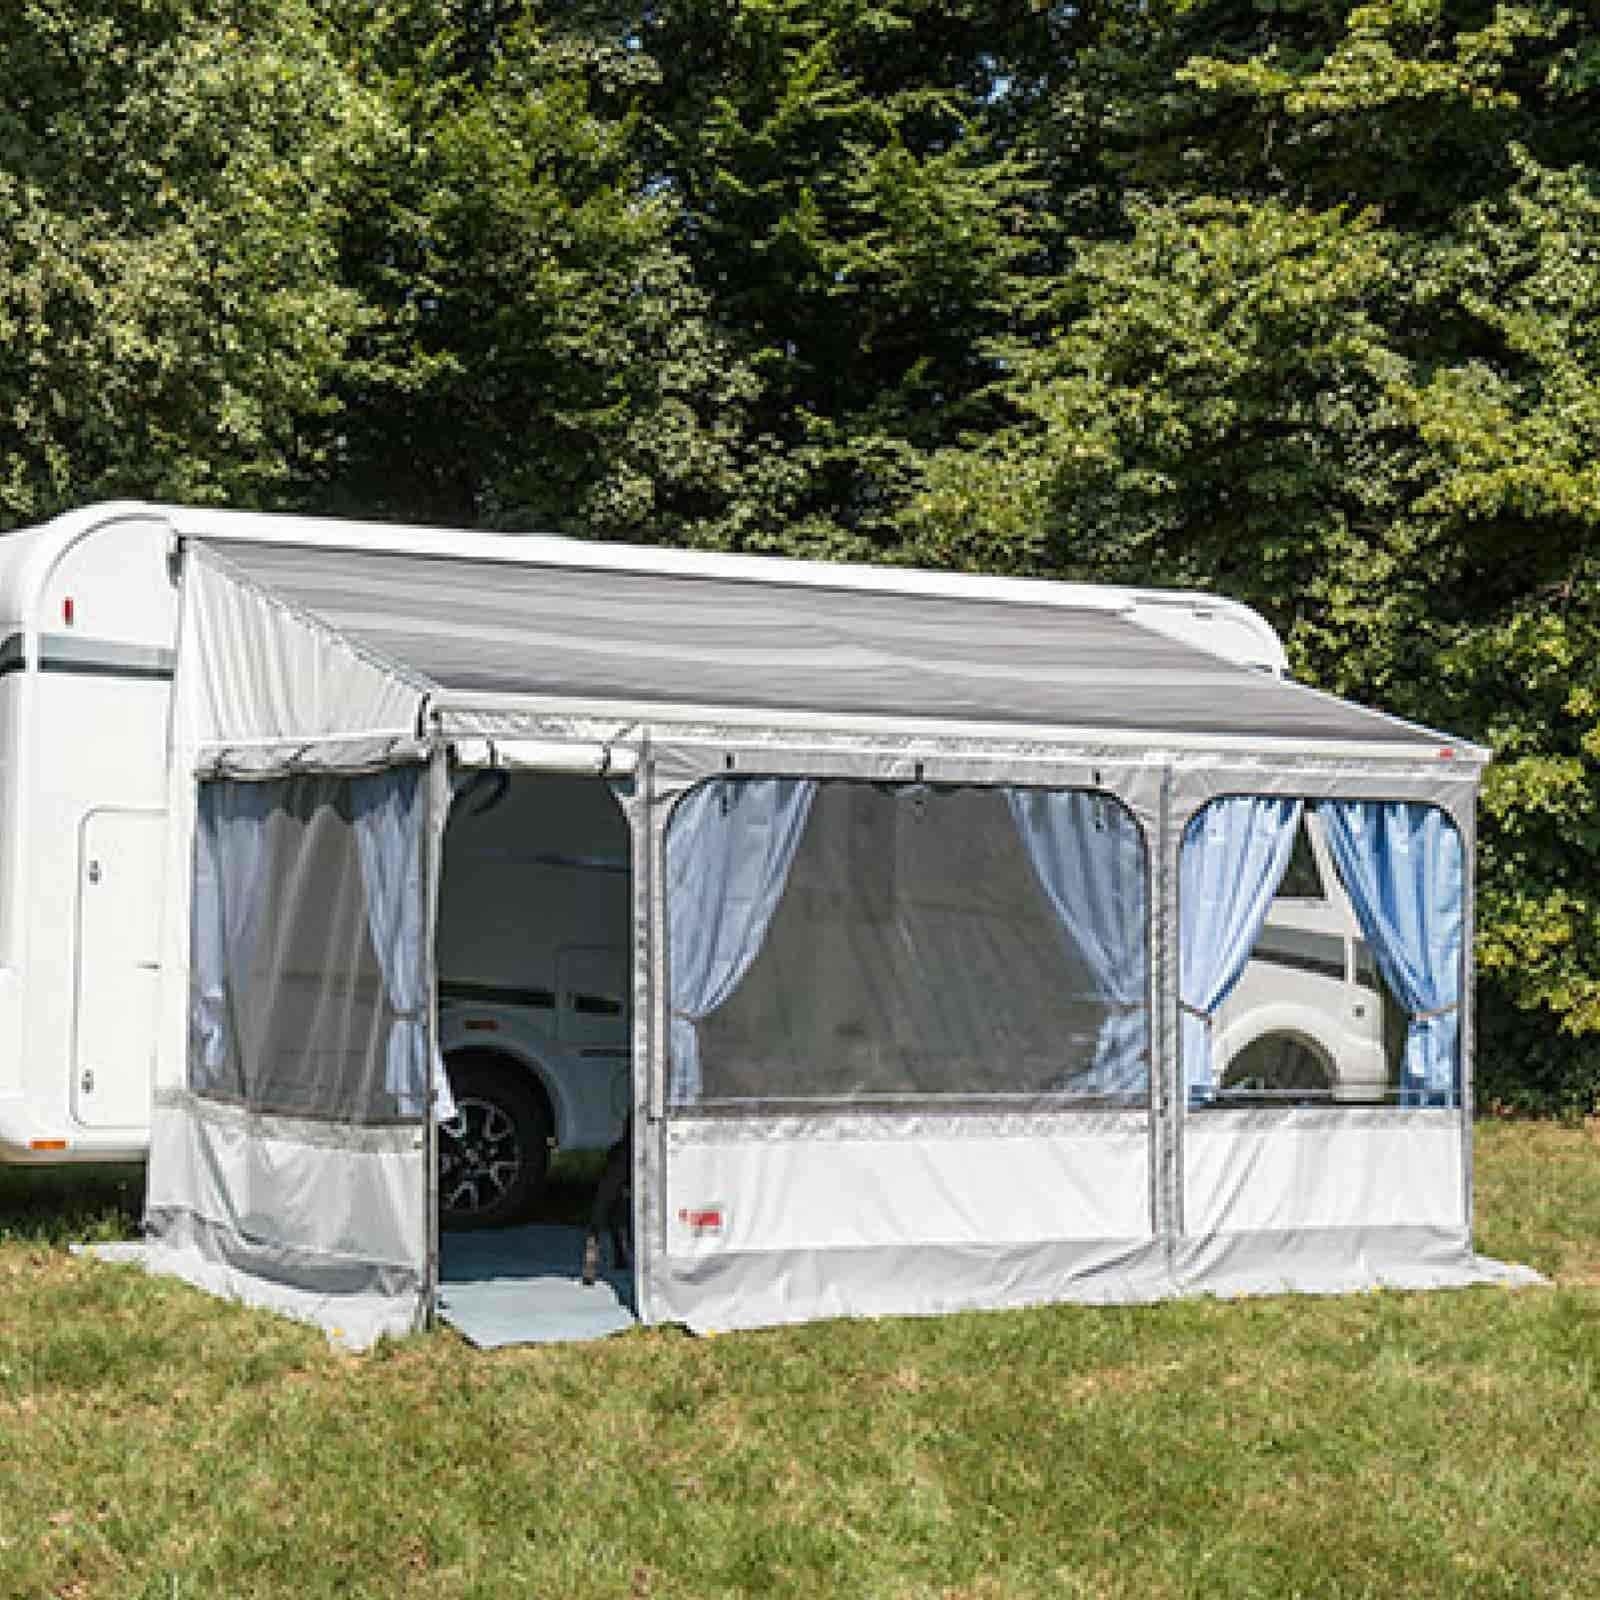 Fiamma Medium Privacy Room made by Fiamma. A Tent sold by Quality Caravan Awnings